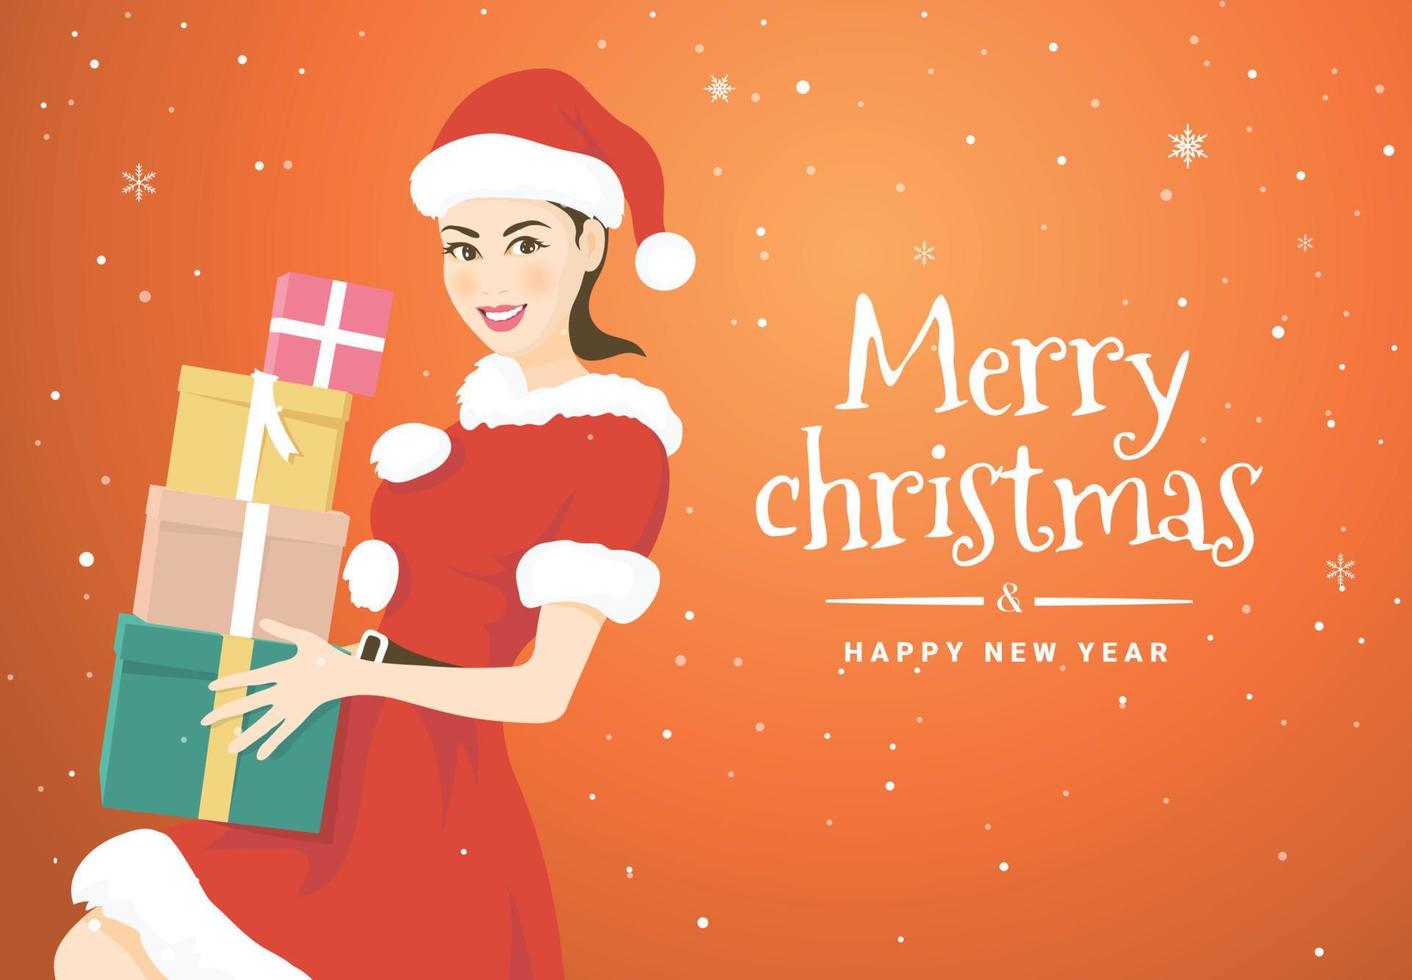 Vector illustration with A beautiful woman in Santa Claus costume holding many gift boxes of the Merry Christmas and Happy New Year